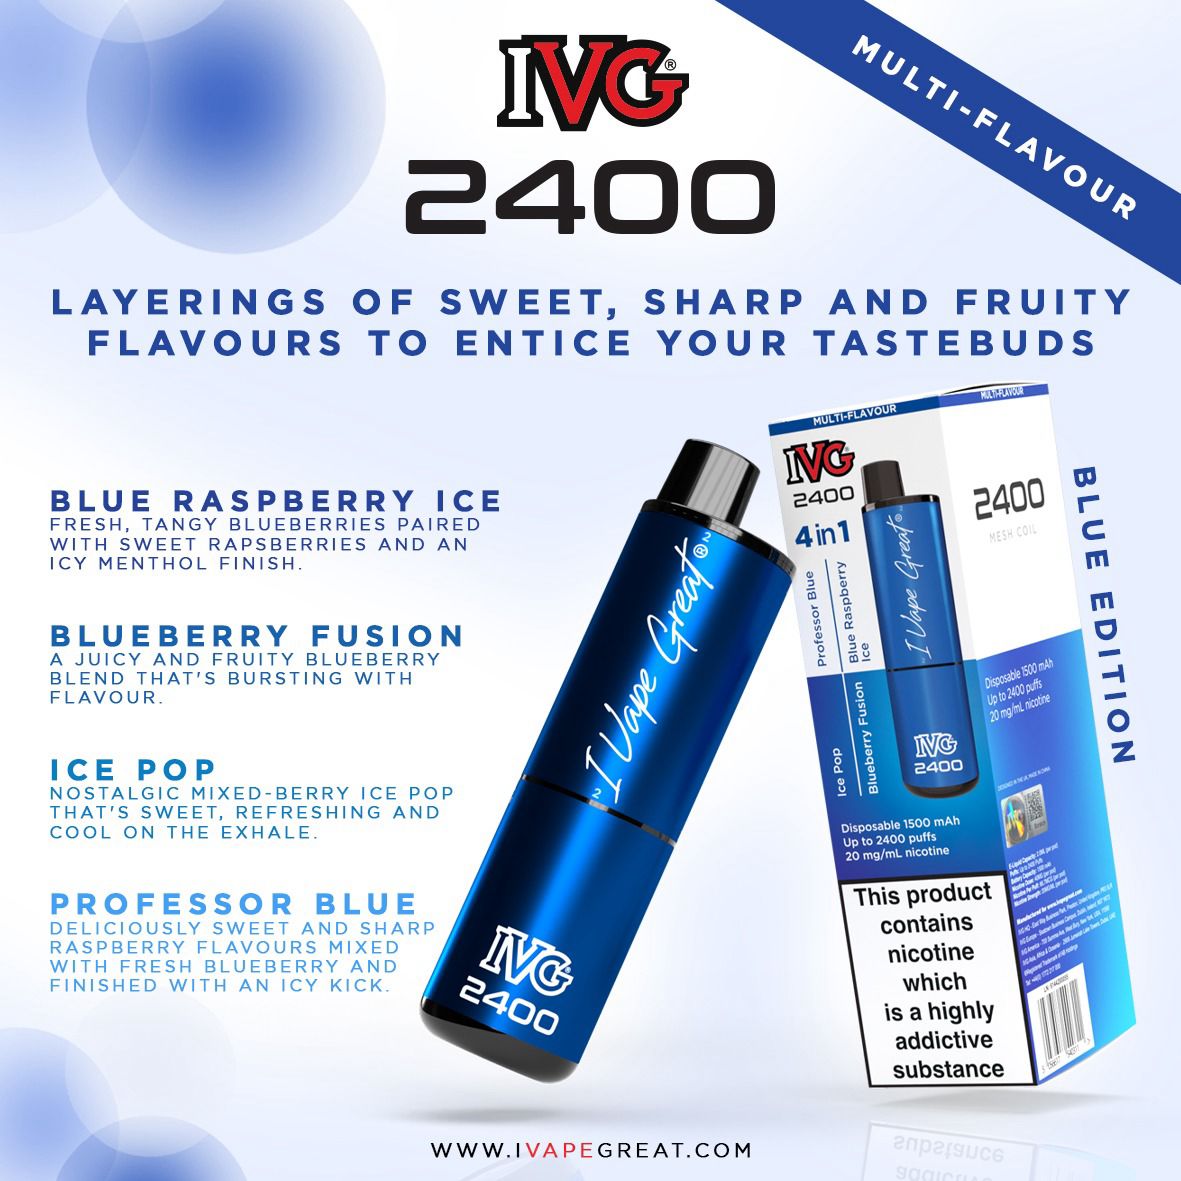 IVG 2400 Disposable Vapes 5 Pack